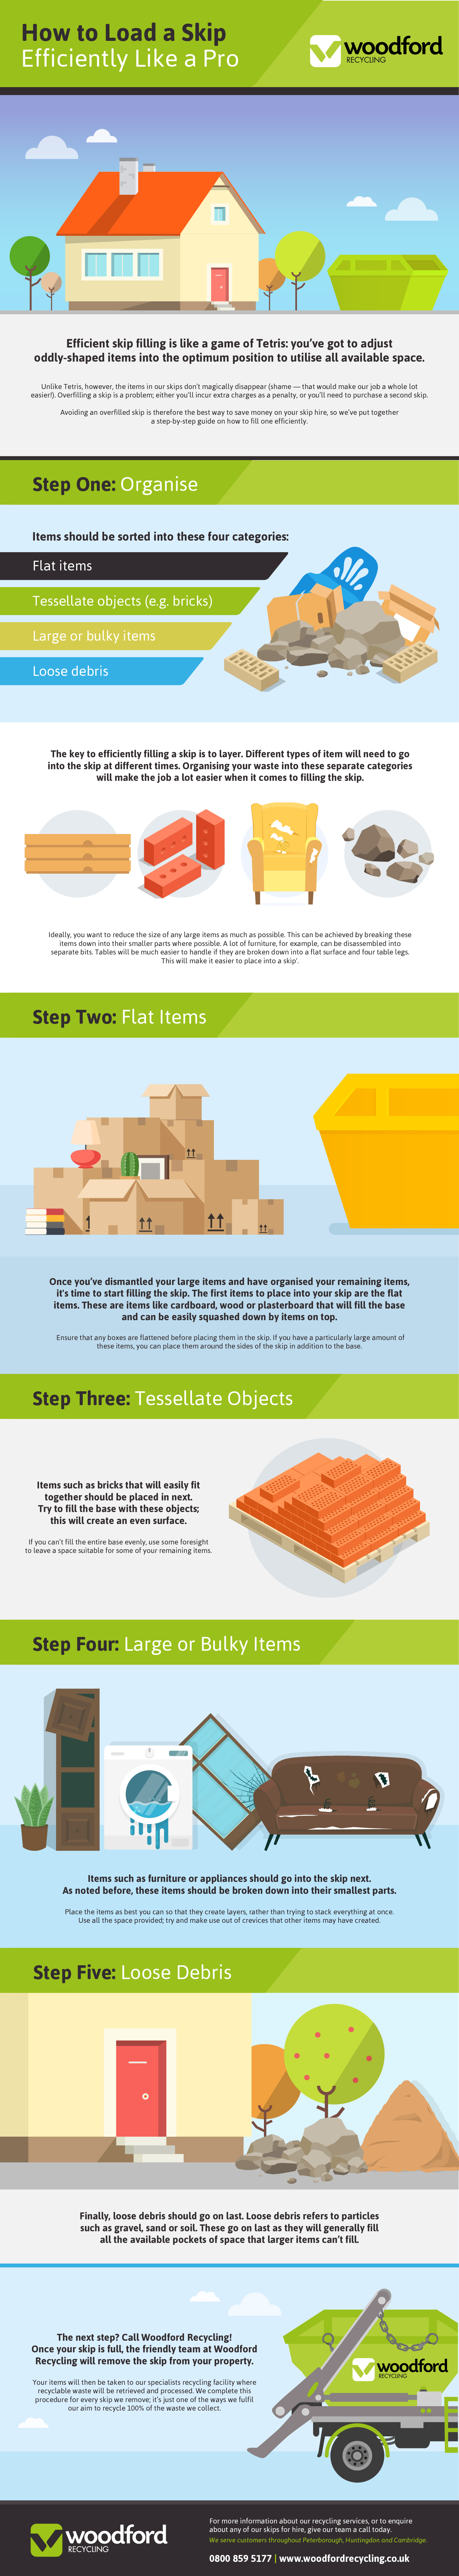 How_to_Load_a_Skip_Efficiently_like_a_pro_Woodford_Recycling_Infographic